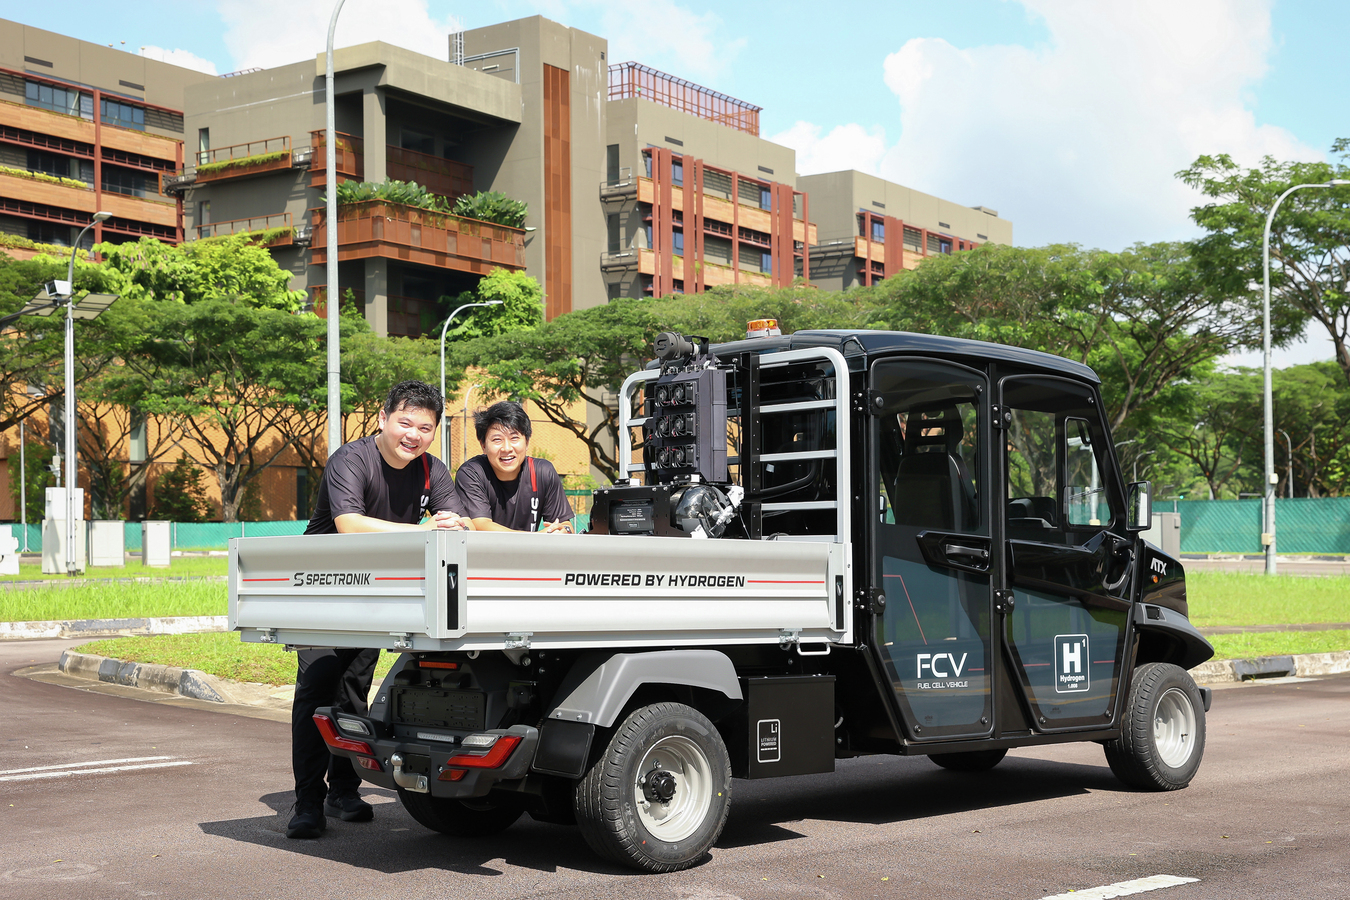 Hydrogen fuel cell truck, Jurong innovation district, zero emissions, sustainable, testbed